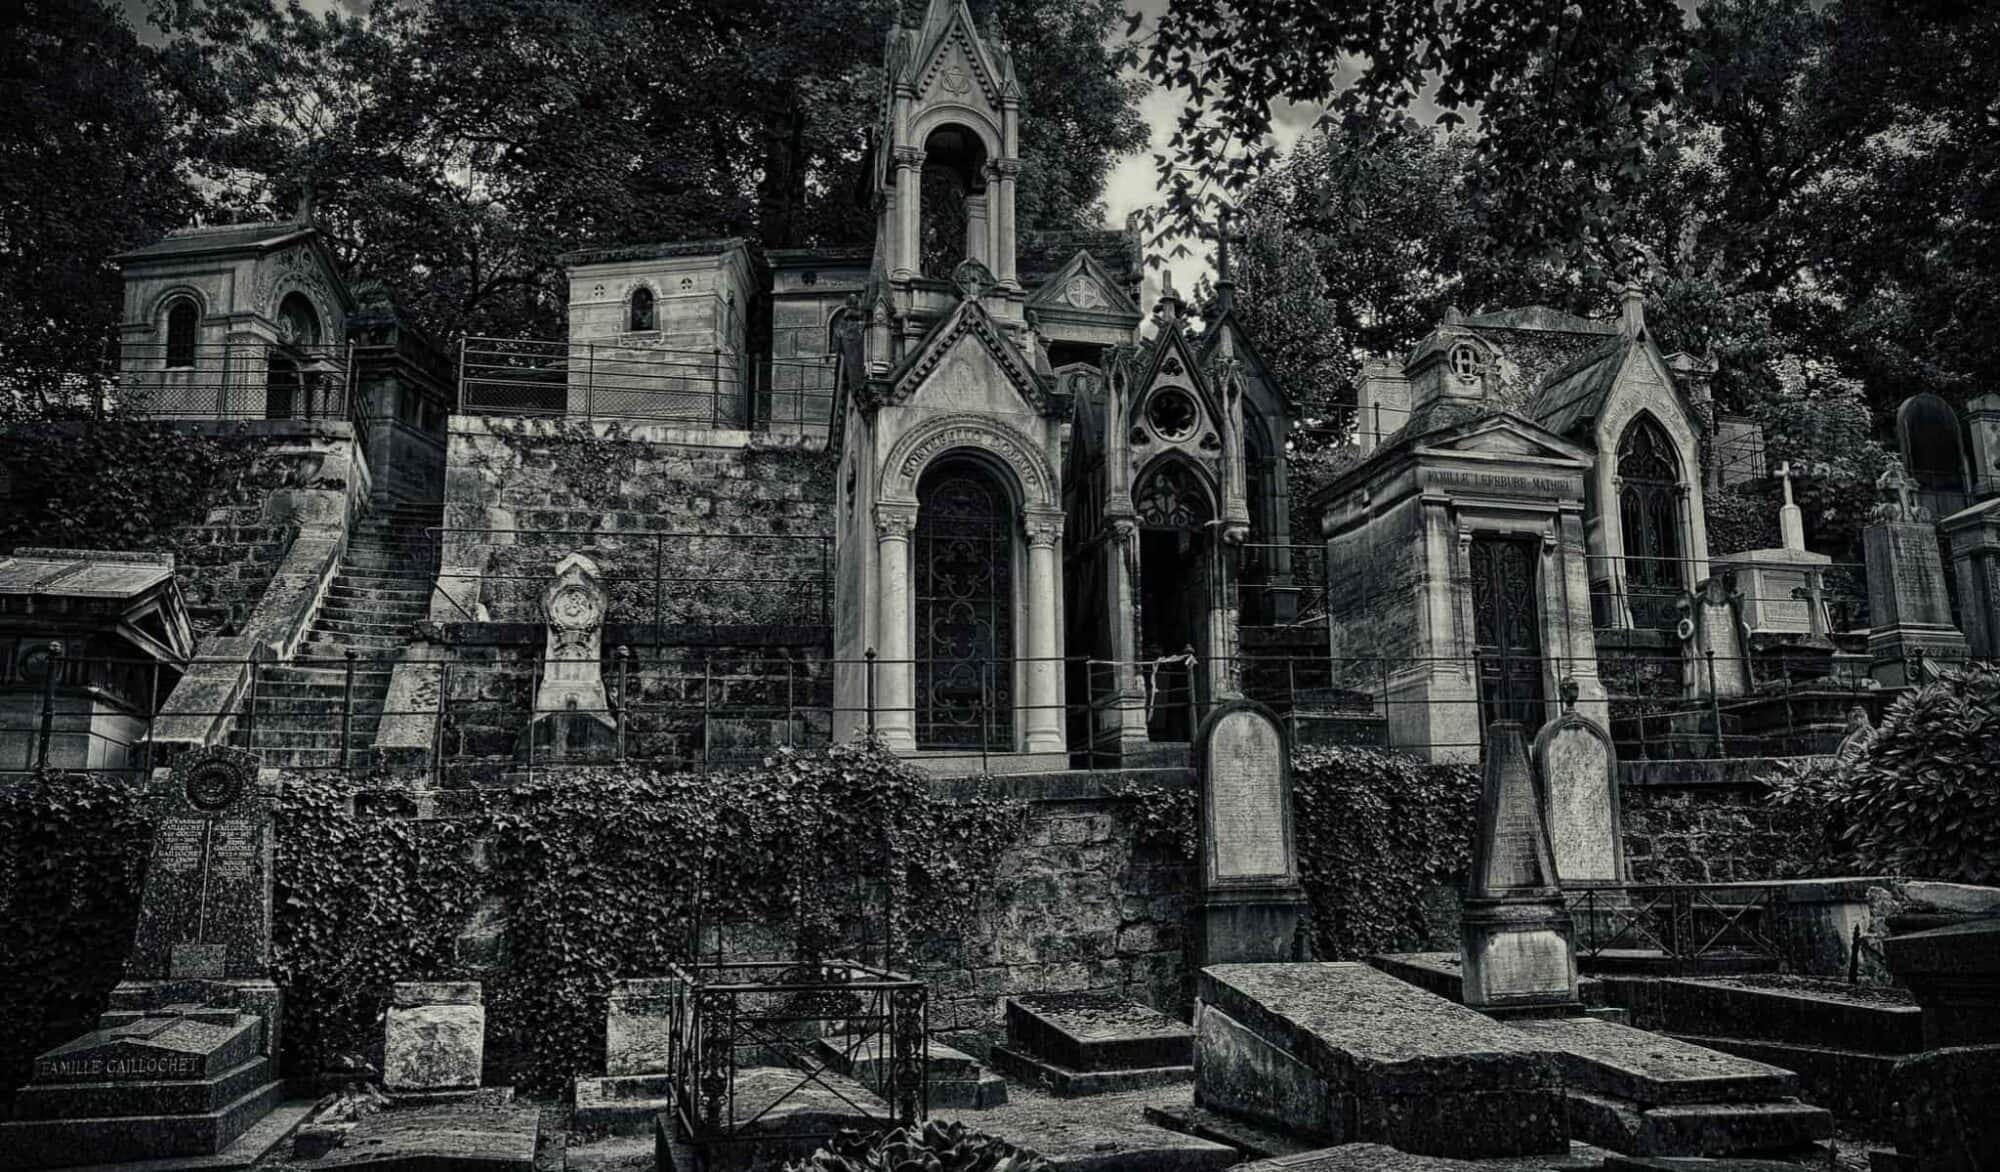 The stone gravestones crowded next to each other in Montparnasse Cemetery photographed in black and white.